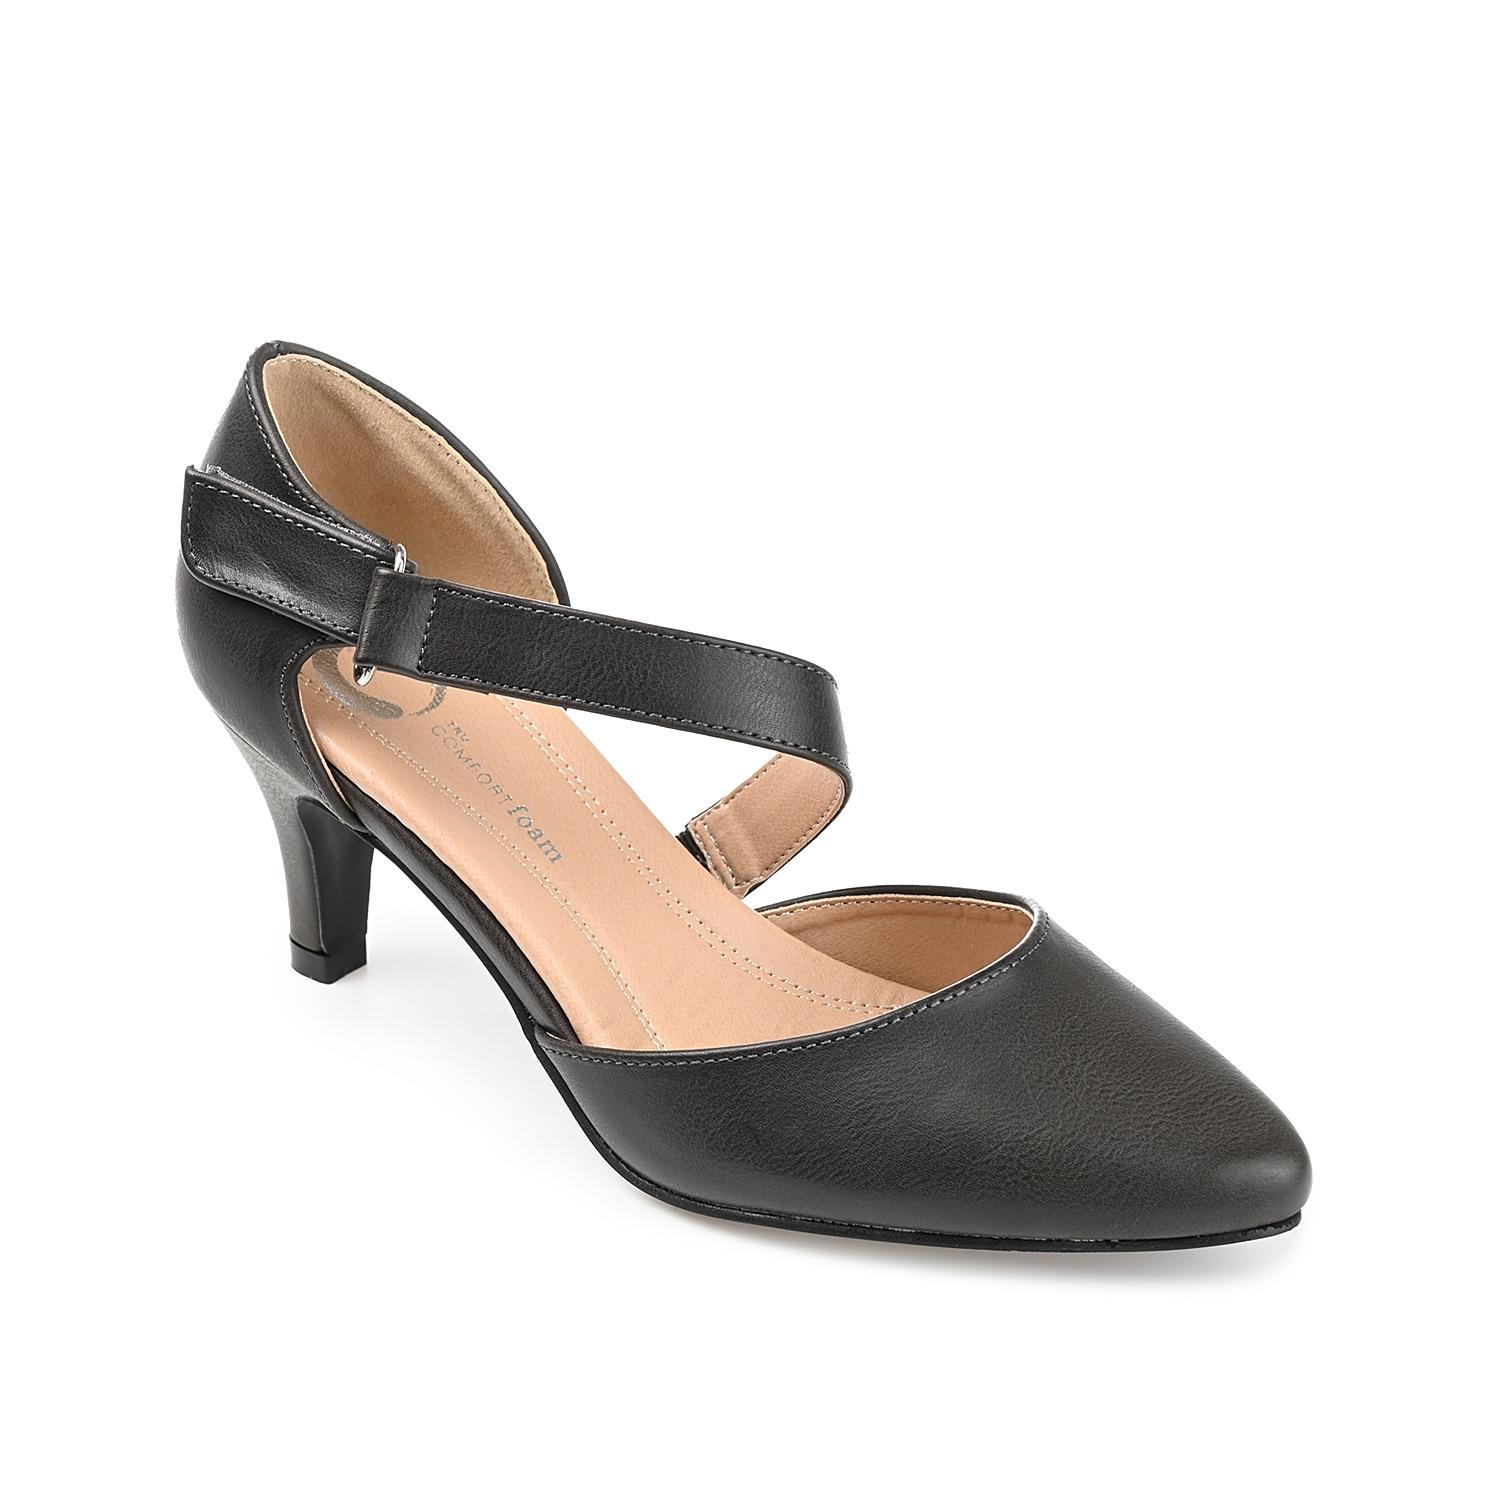 Journee Collection Journee Collection Tillis Womens DOrsay Pumps Black Product Image